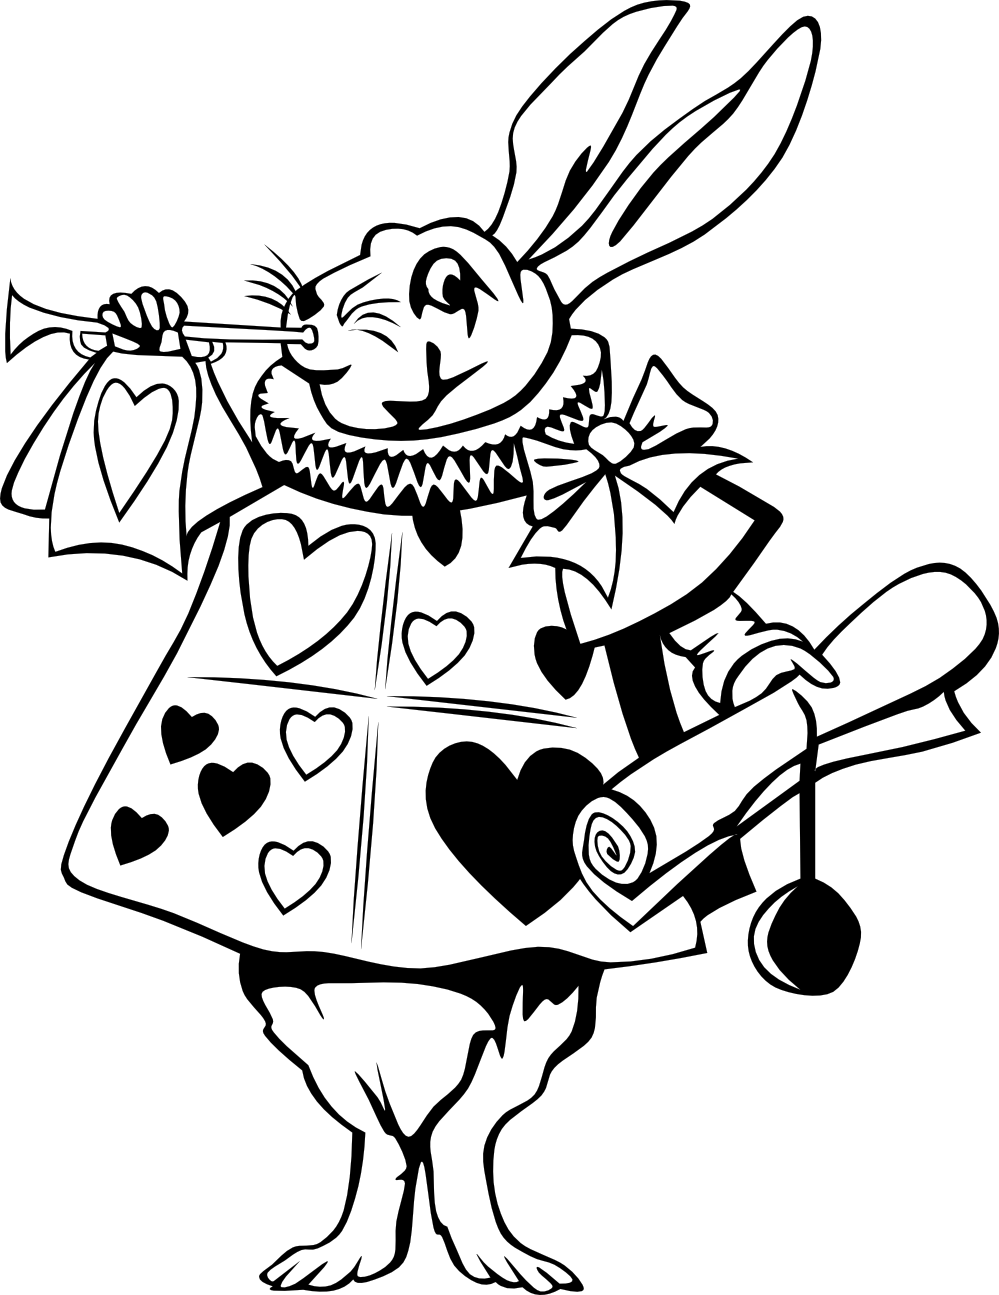 alice in wonderland black and white clipart - photo #1